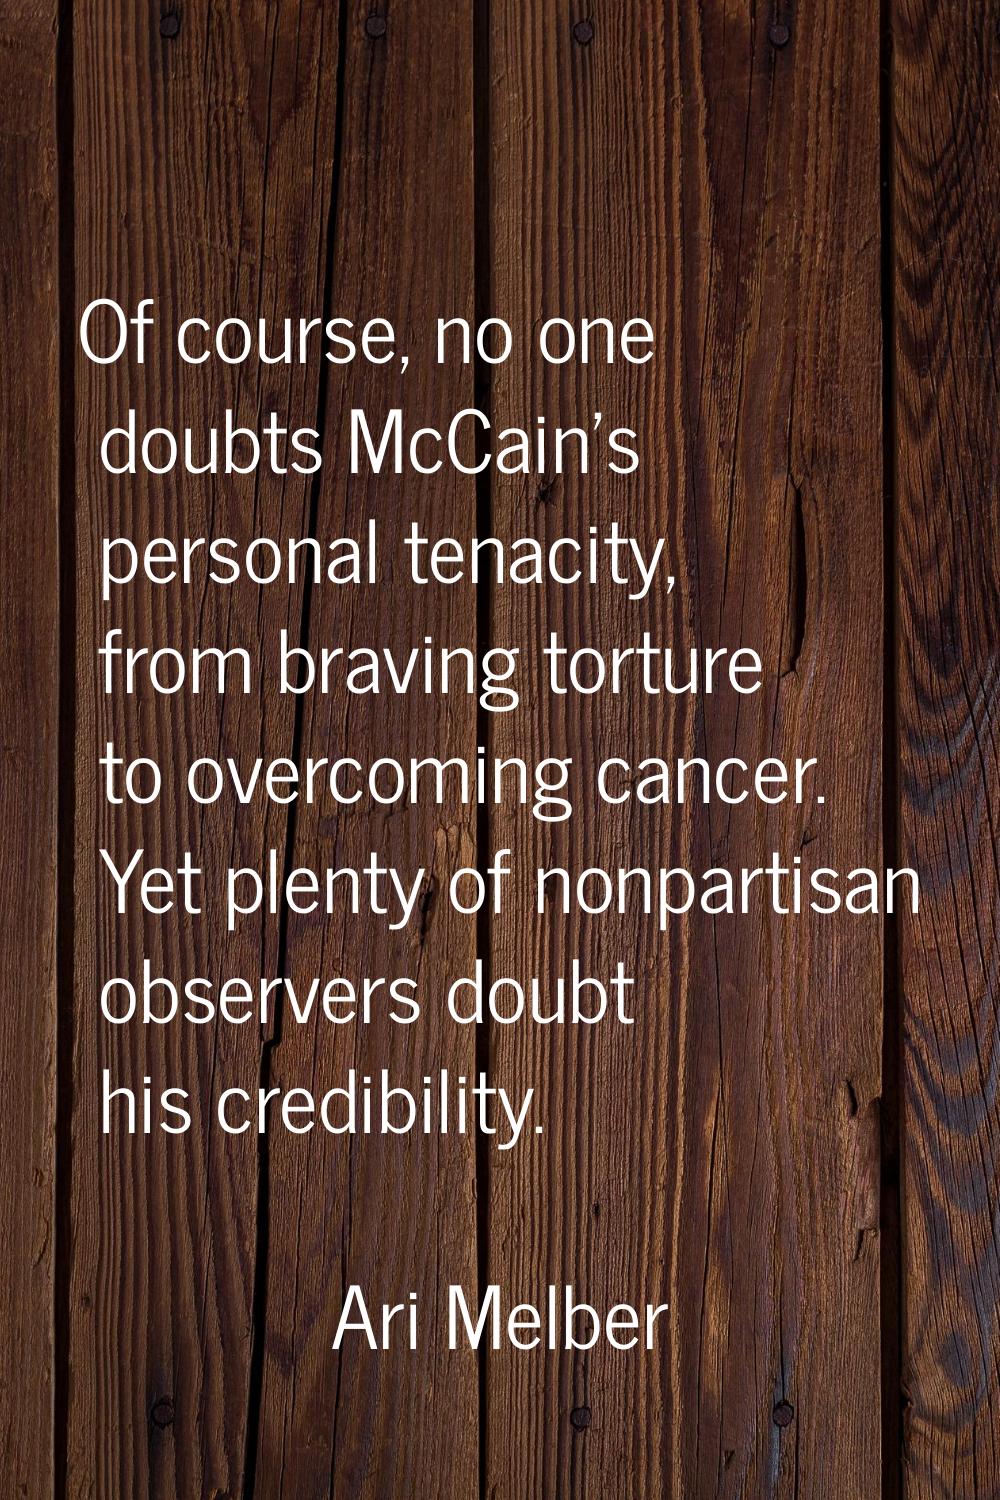 Of course, no one doubts McCain's personal tenacity, from braving torture to overcoming cancer. Yet